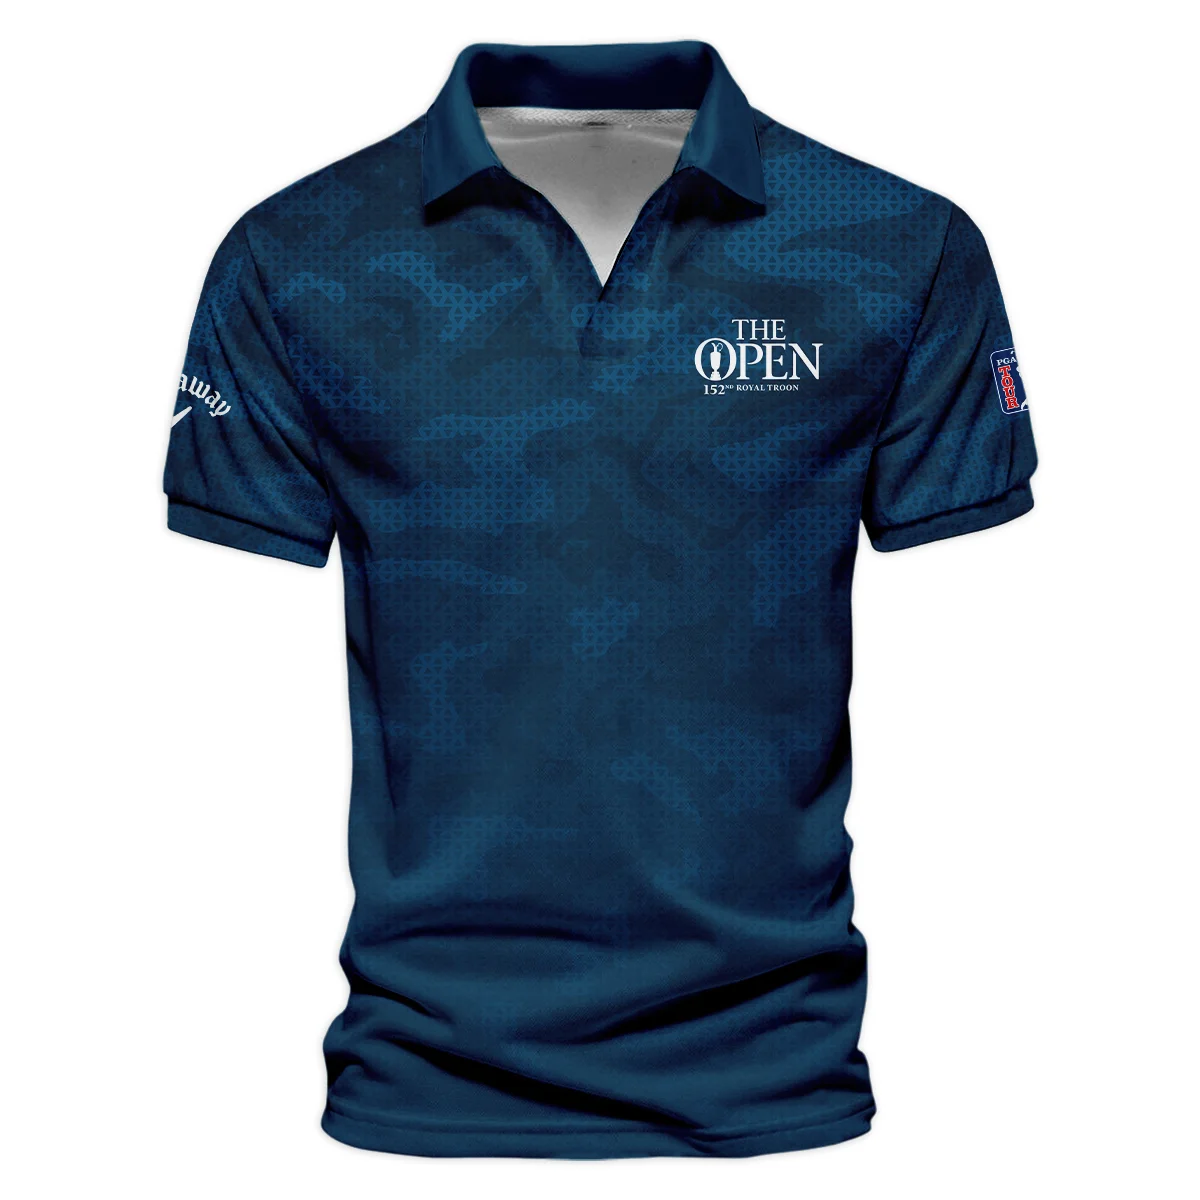 Callaway 152nd Open Championship Dark Blue Abstract Background Performance T-Shirt All Over Prints HOTOP260624A02CLWTS